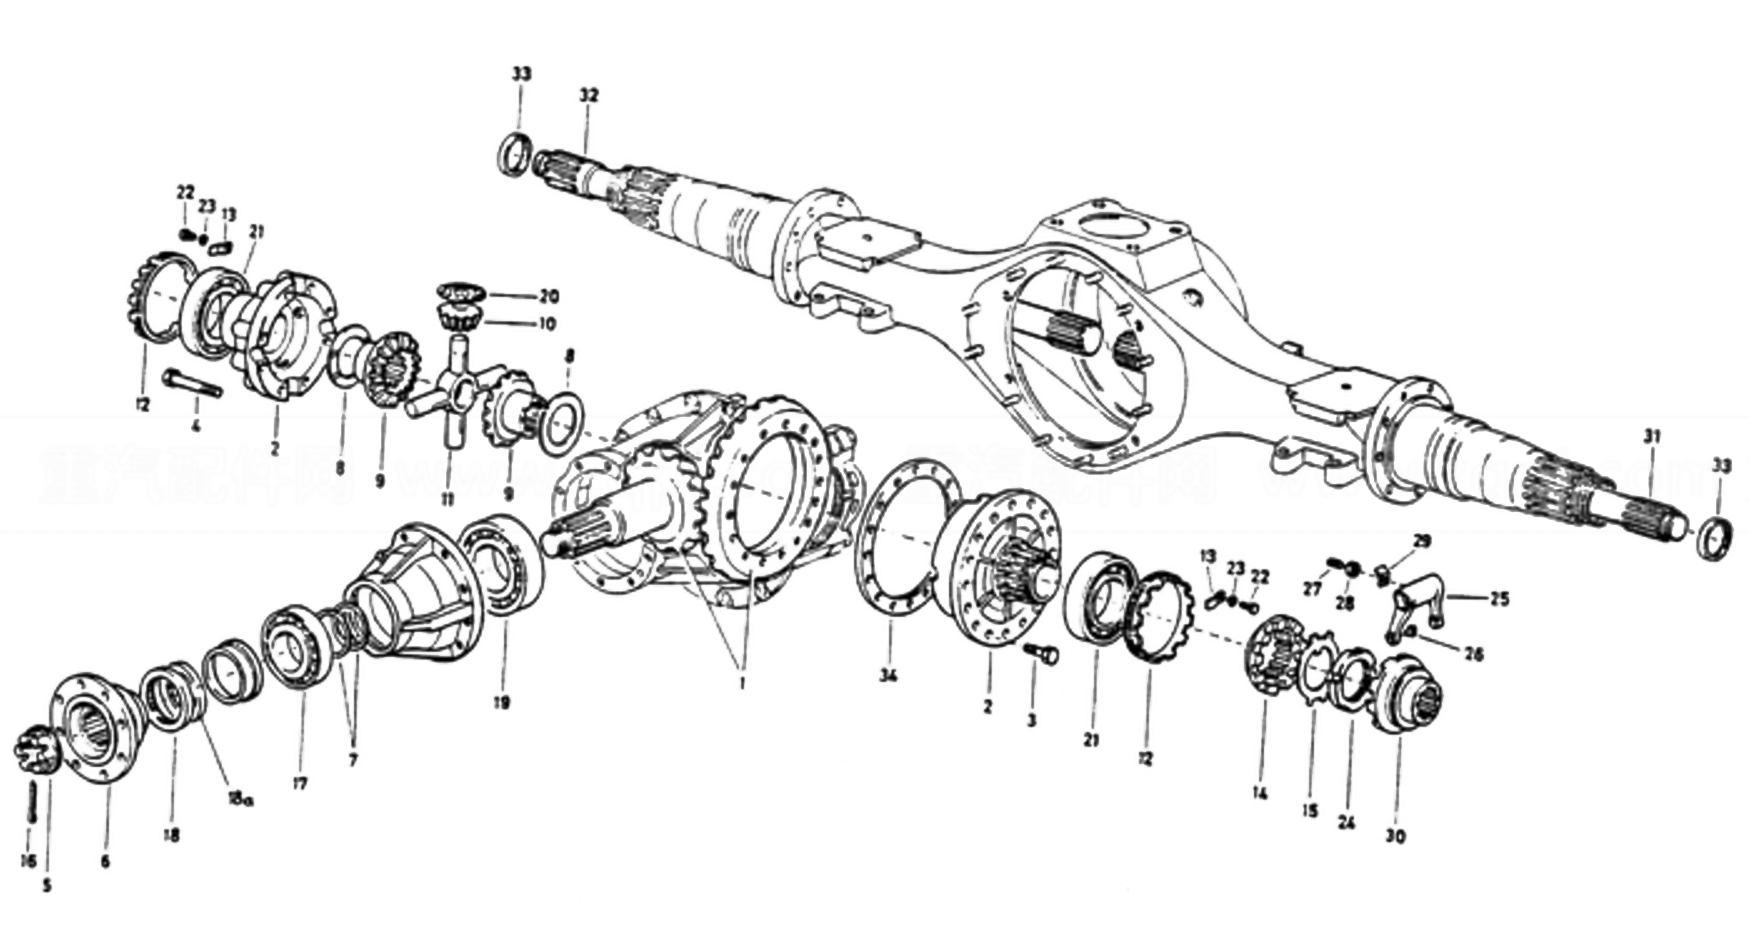 2nd Rear Driving Axle Driving Assembly, Howo Parts Catalogs.